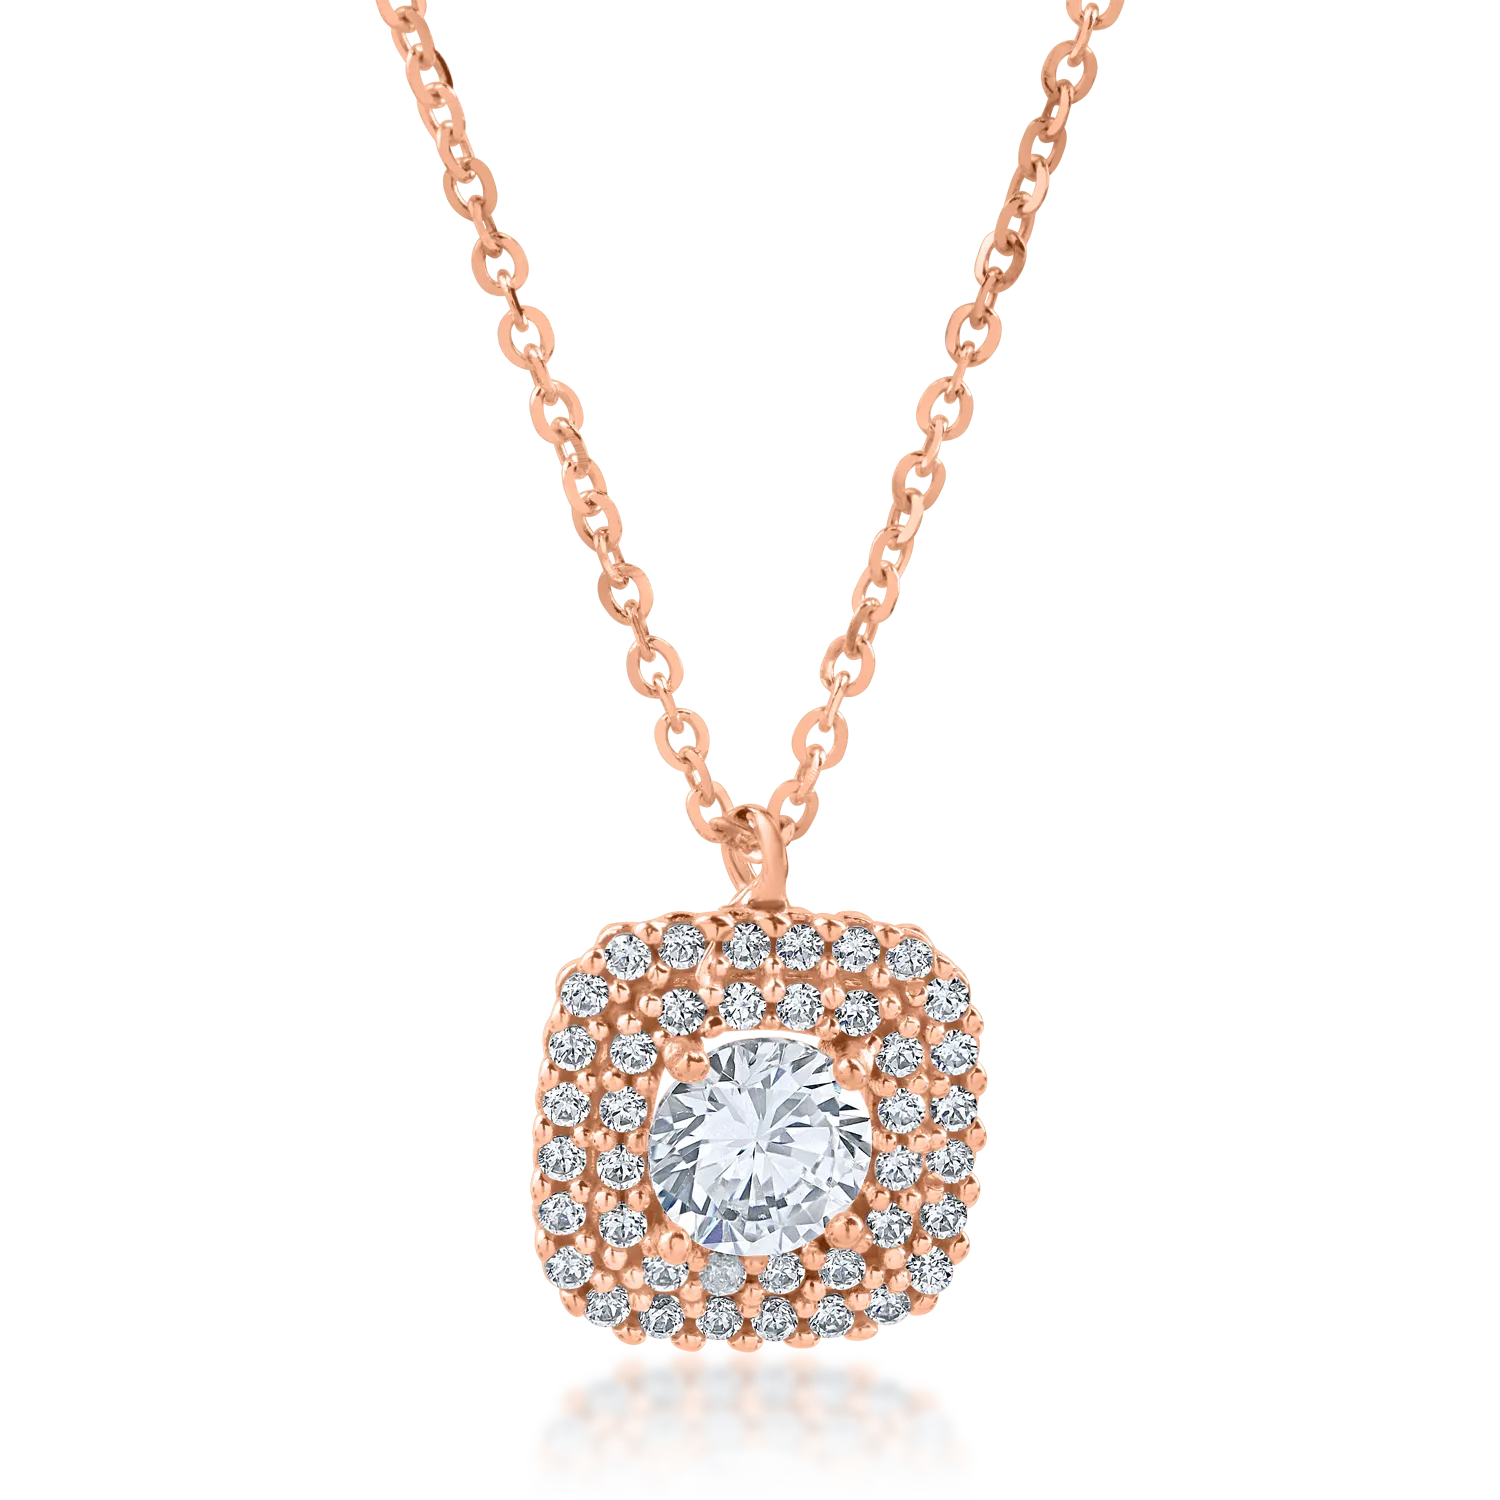 Rose gold geometric pendant necklace with zirconia